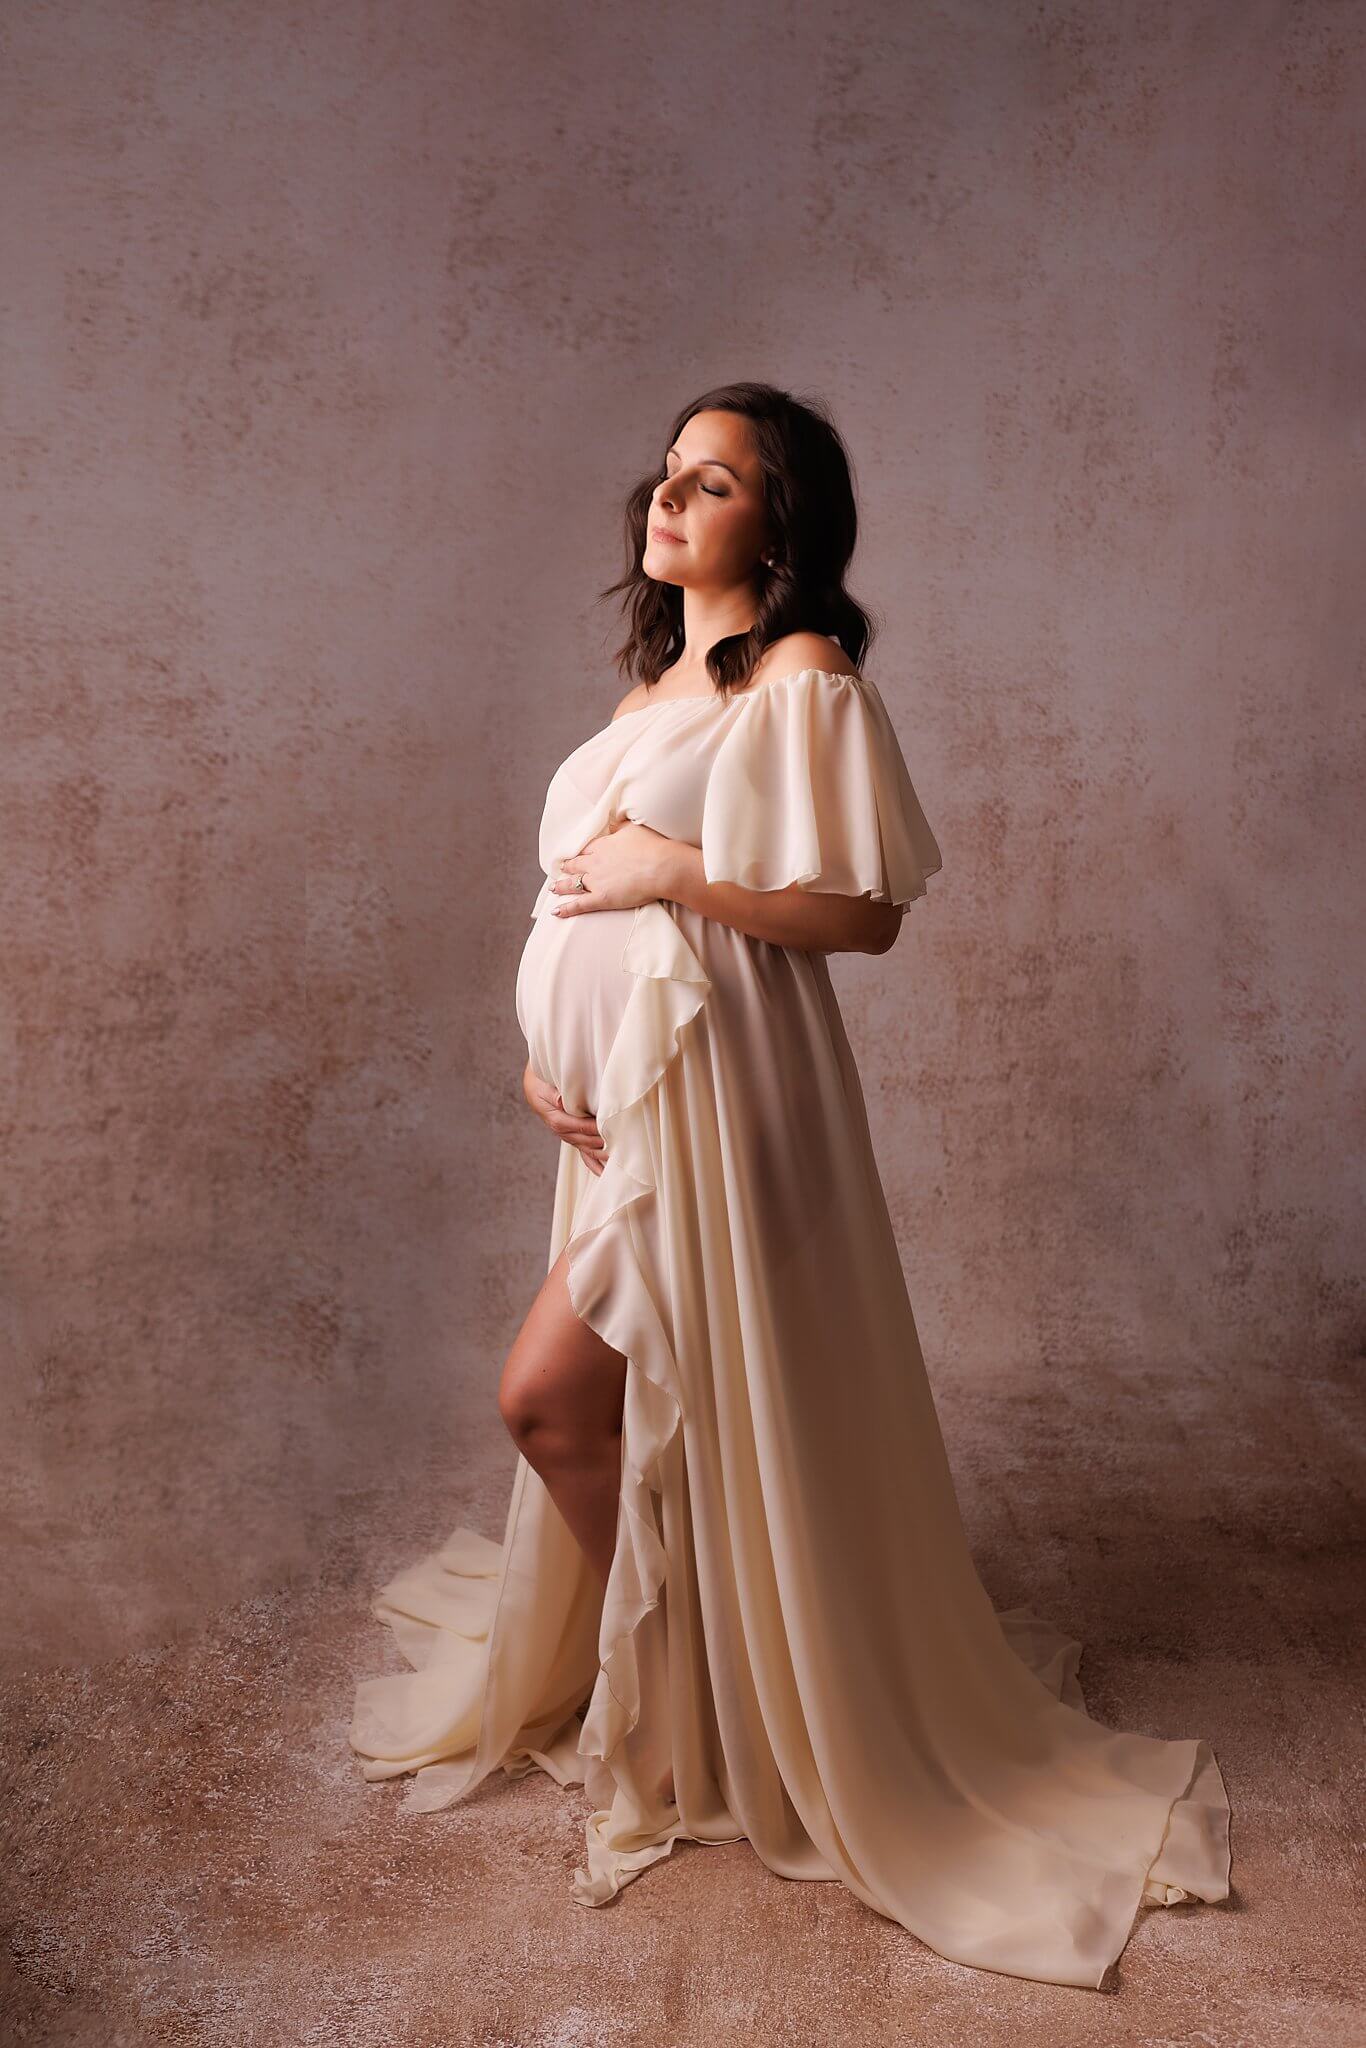 Pregnant woman in an ivory dress on a light backdrop